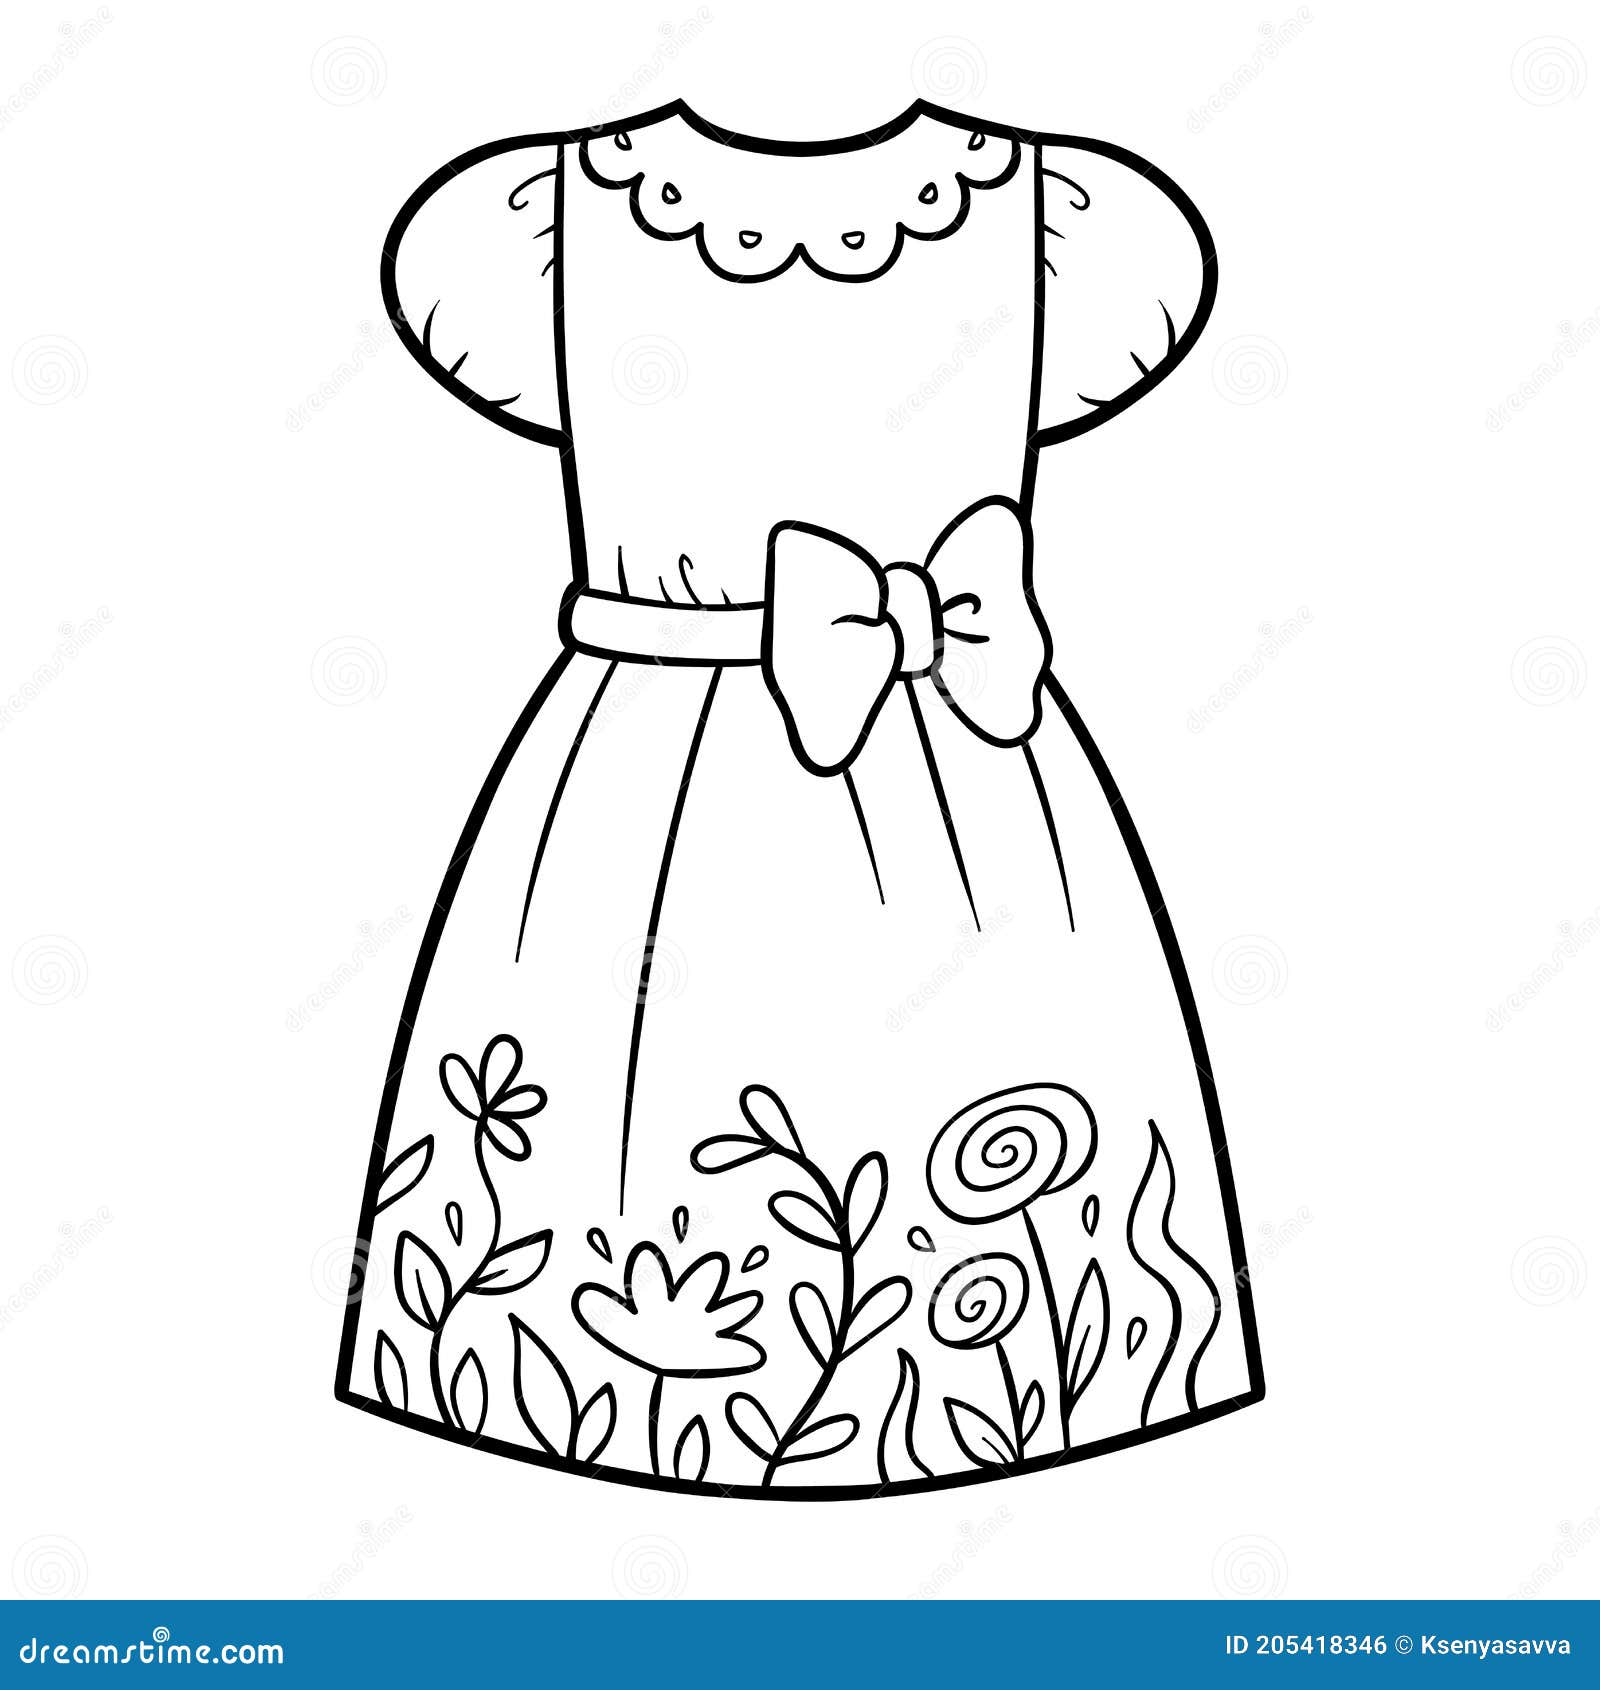 Coloring book, Dress stock vector. Illustration of child - 205418346